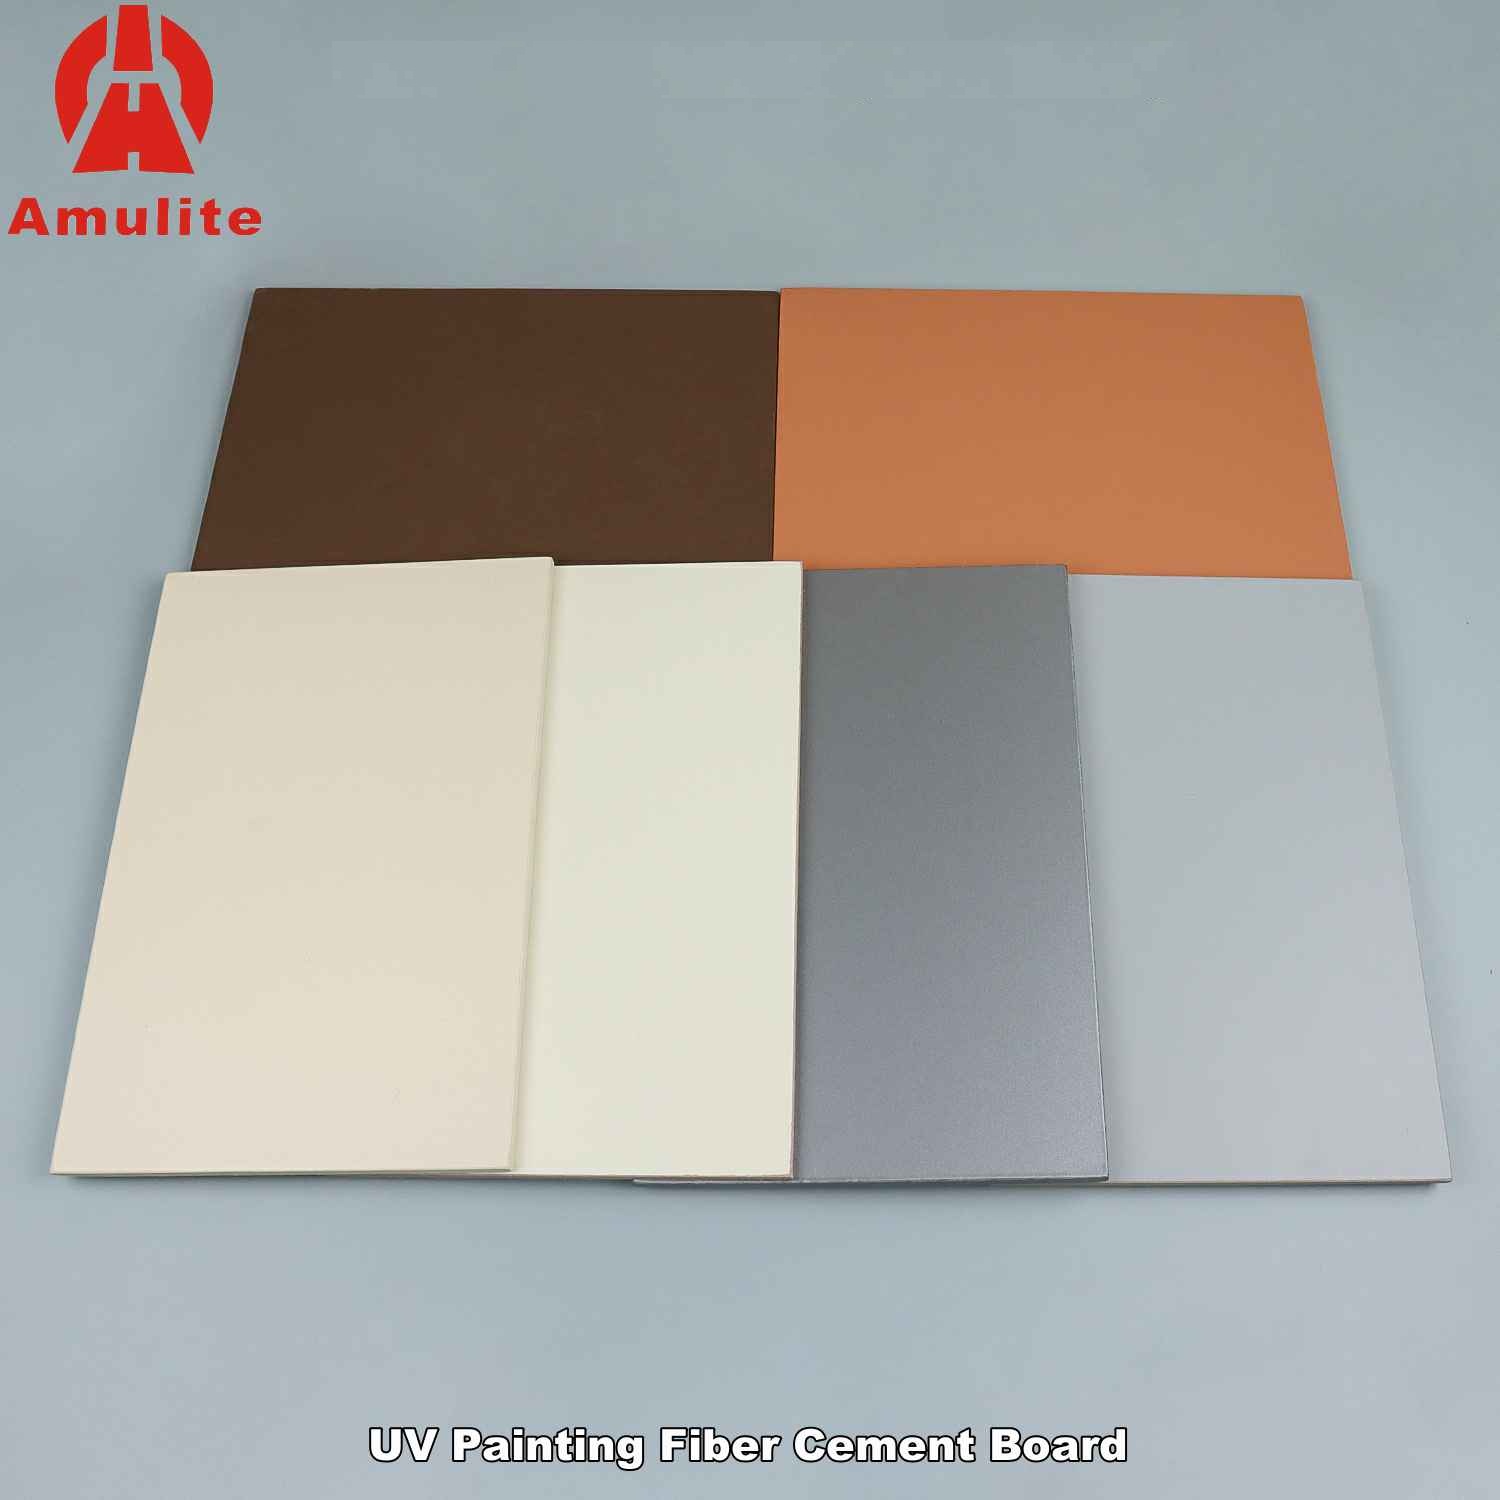 Amulite UV Painting Fiber Cement Board Featured Image